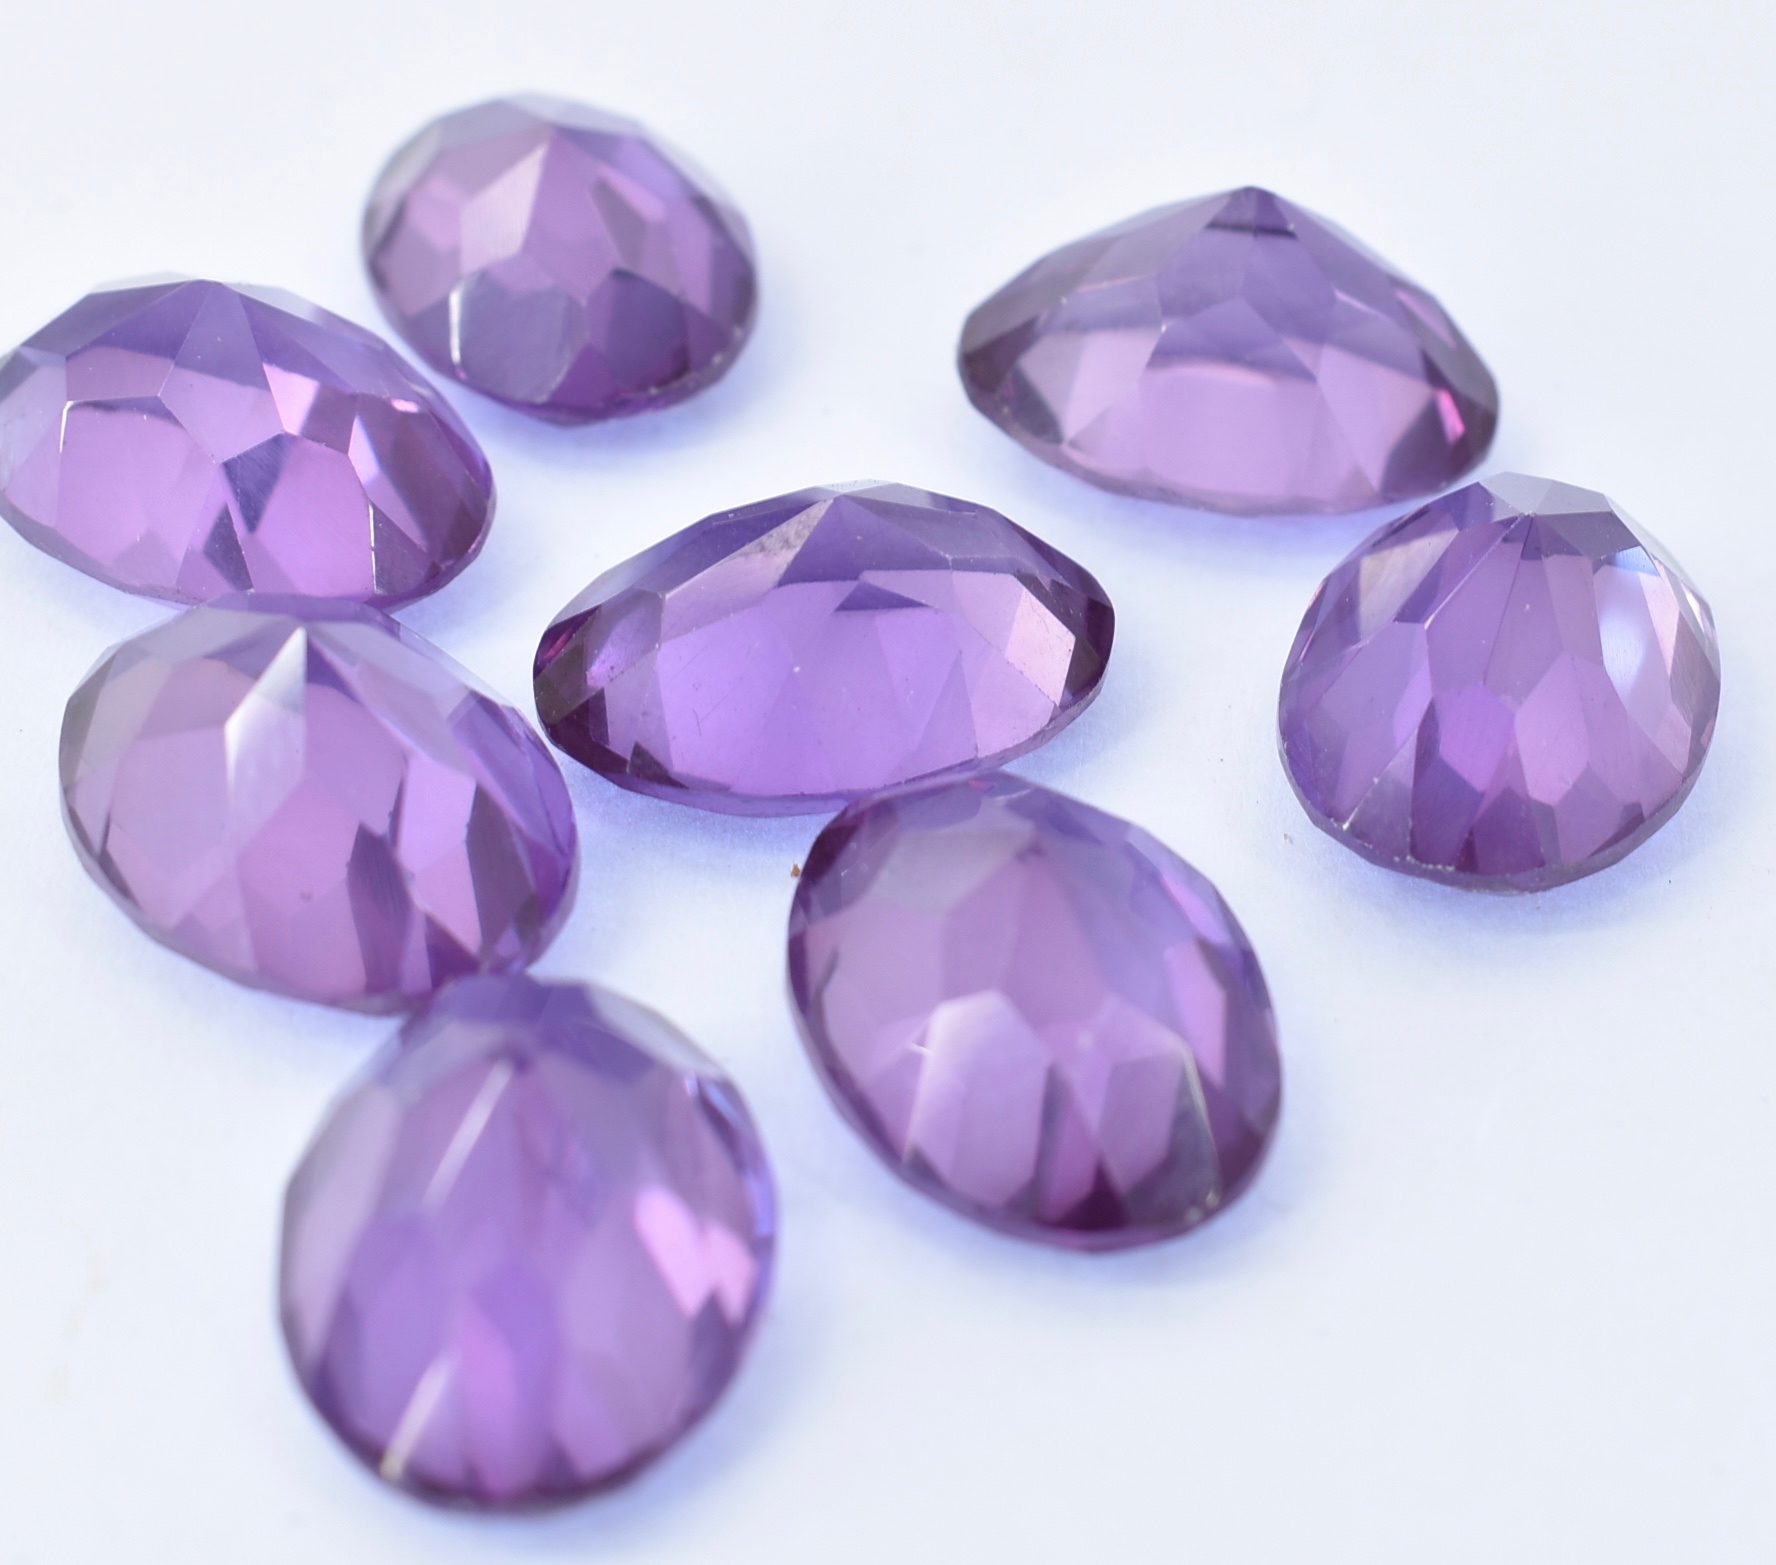 LOOSE GEMSTONES - SYNTHETIC COLOUR CHANGE SAPPHIRE - Image 4 of 4